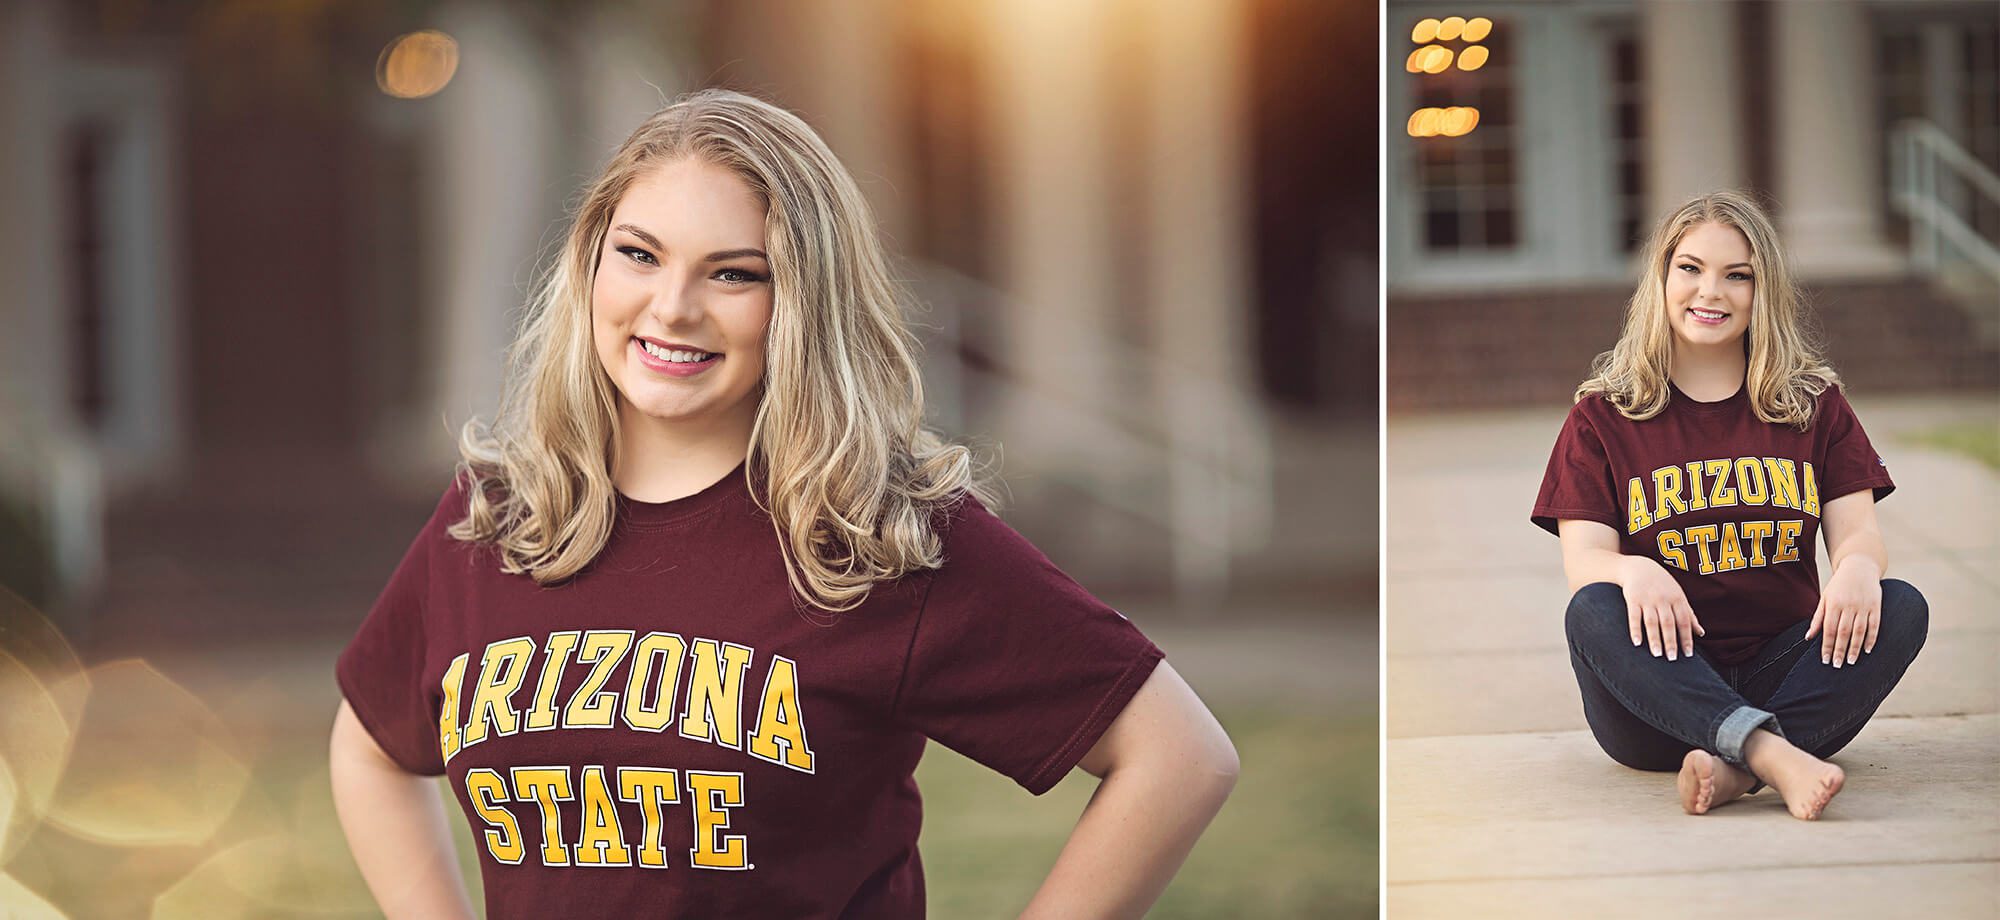 High school senior, Olivia, proudly wears her Arizona State University t-shirt while casually posing on campus during her senior portrait session